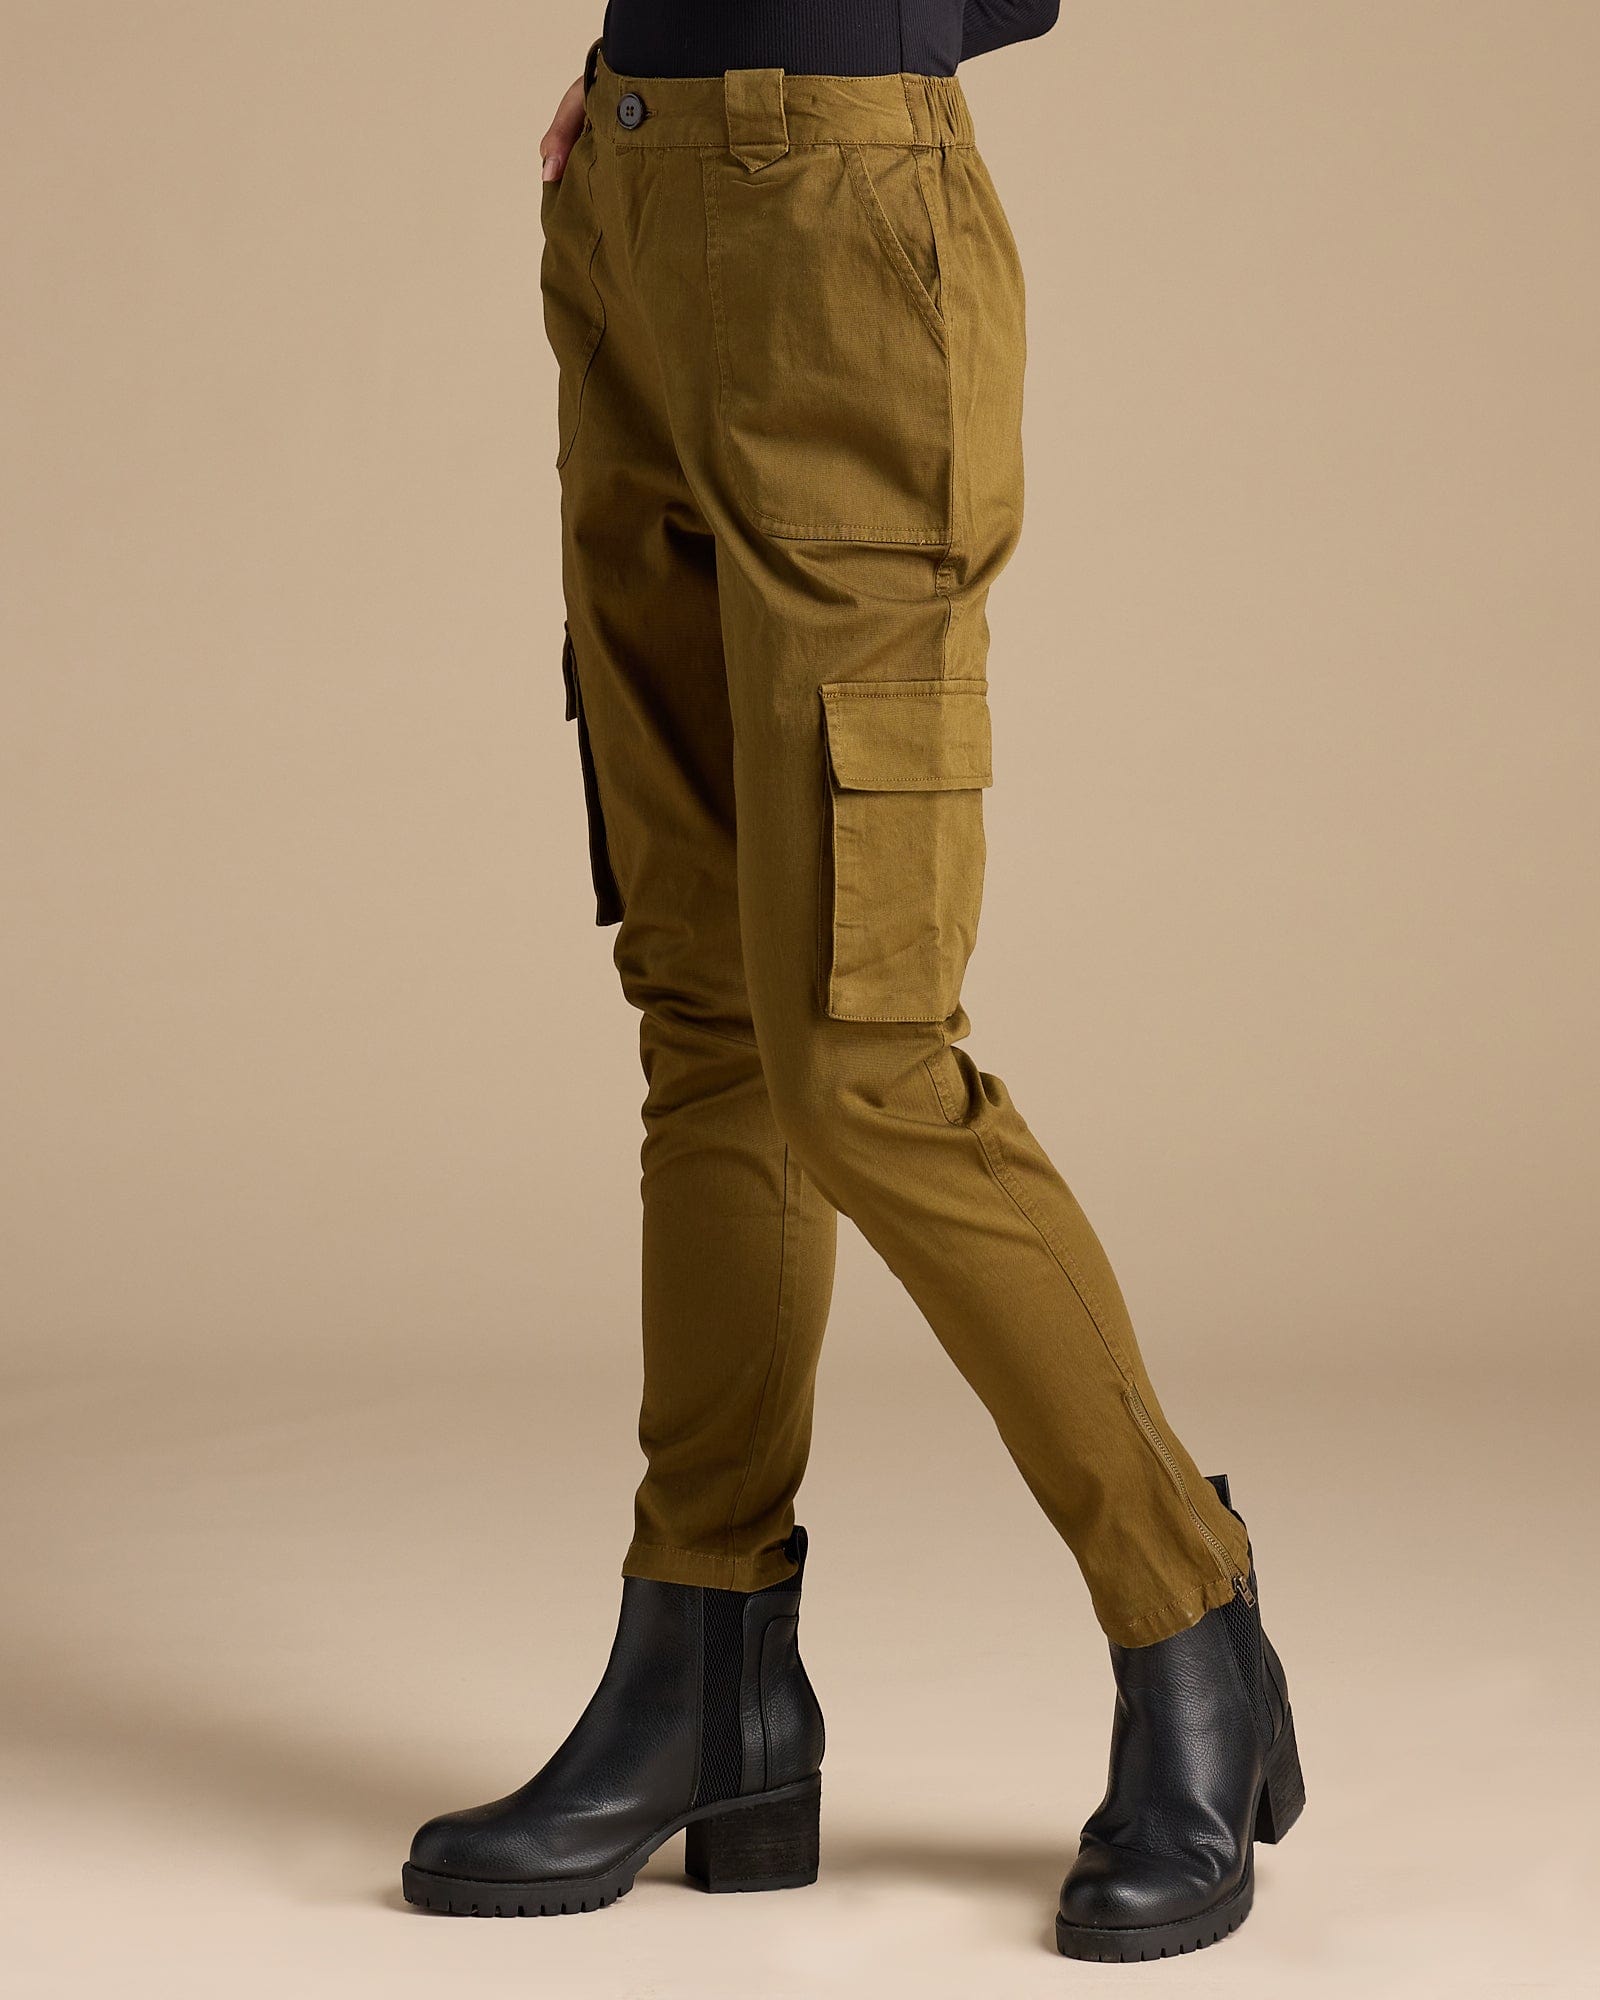 Woman in solid, jogger style cargo pants